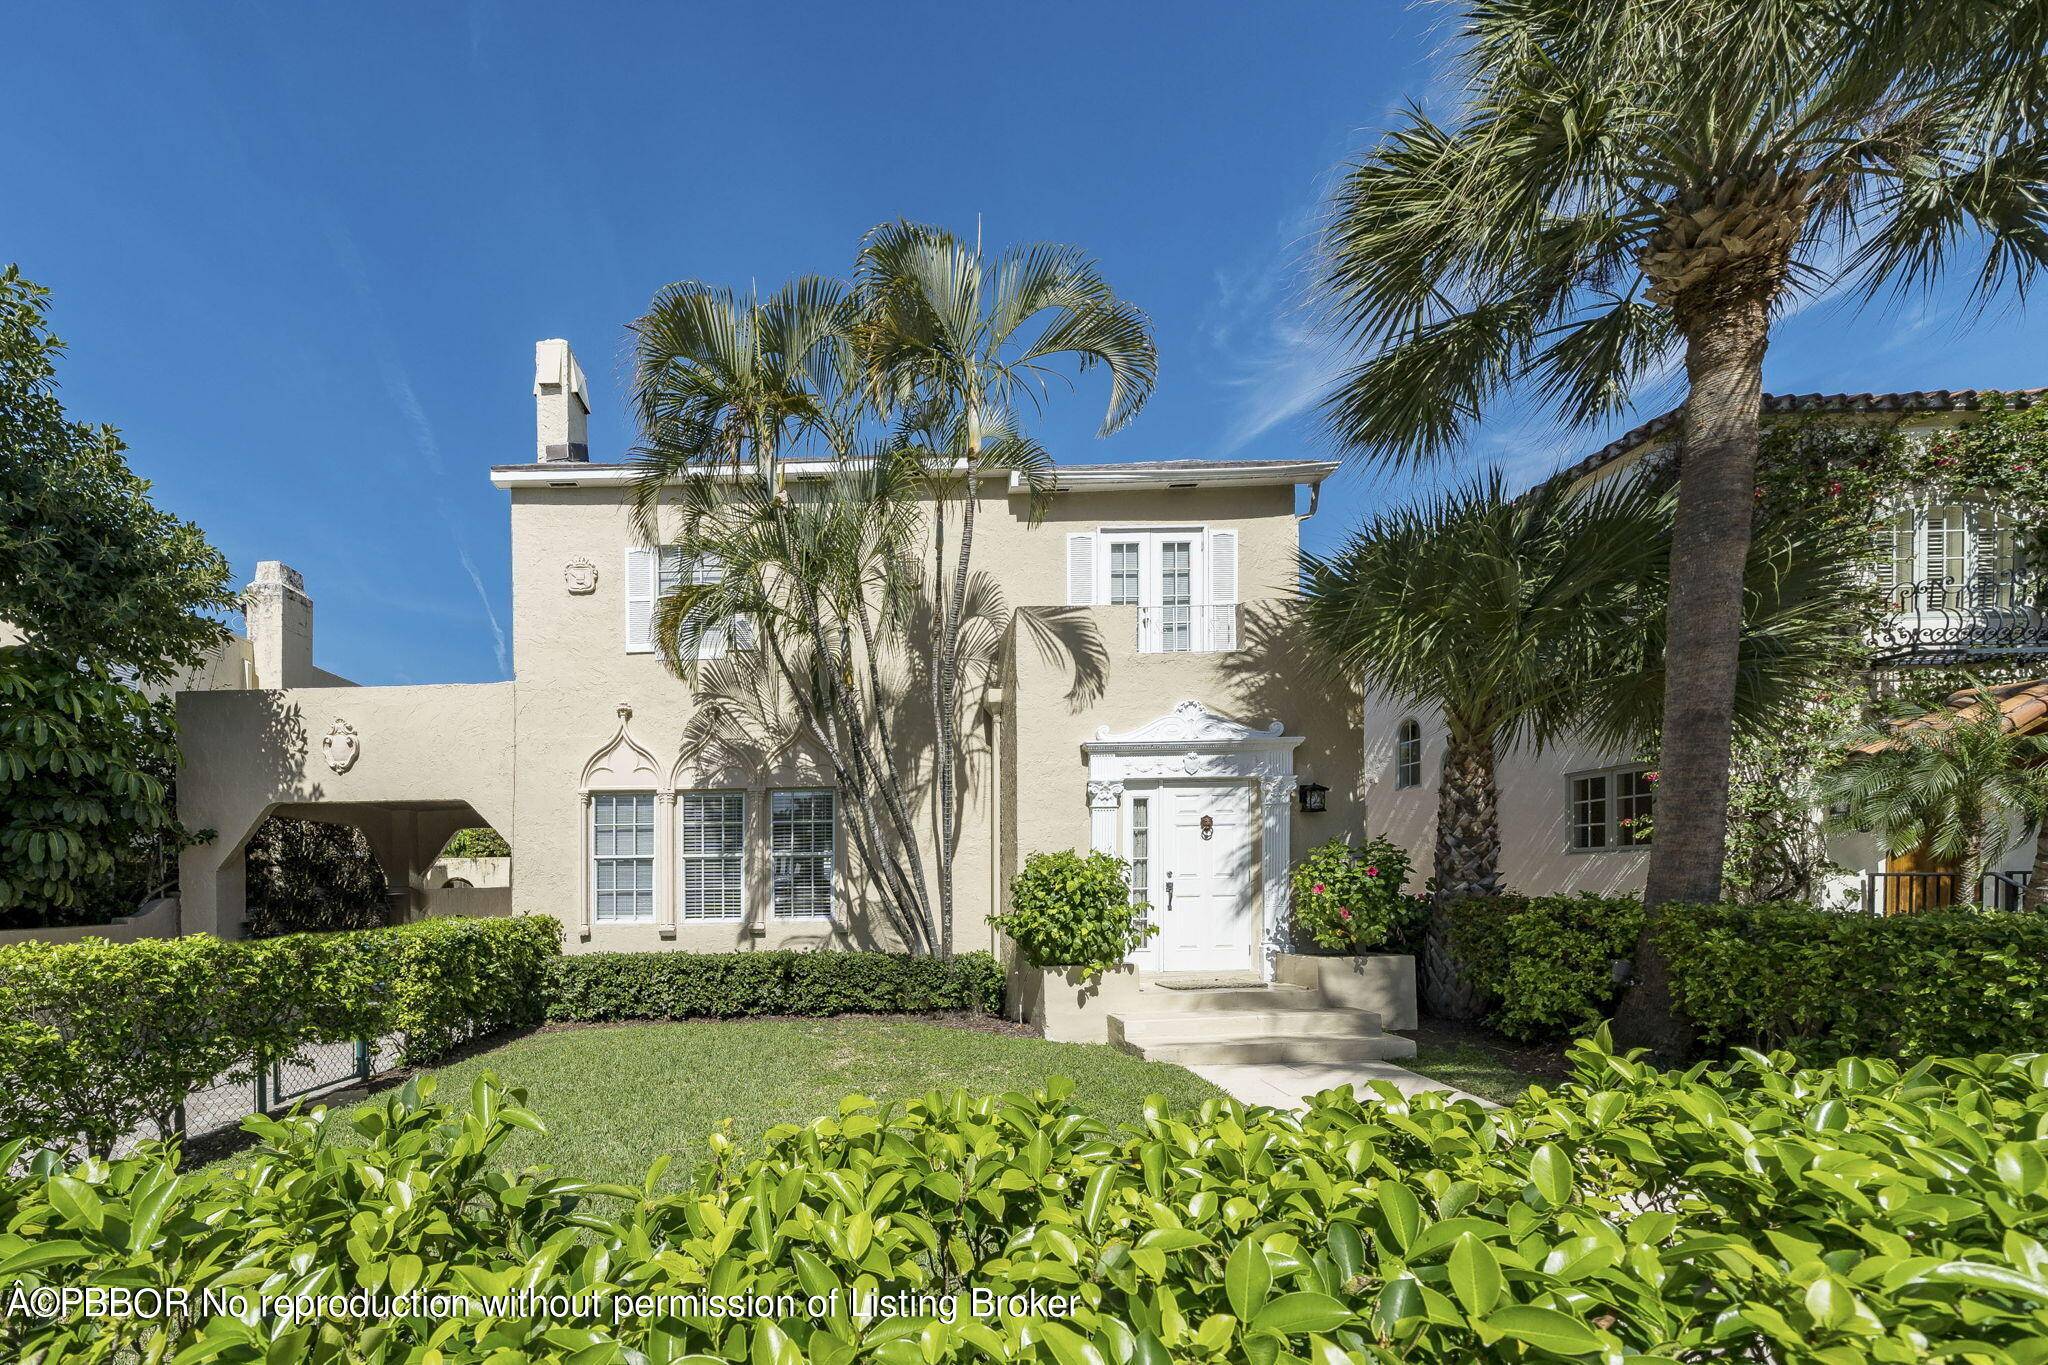 Wonderful, 1920's classic Palm Beach style home located in the highly desirable 'Sea Streets' with deeded beach access !